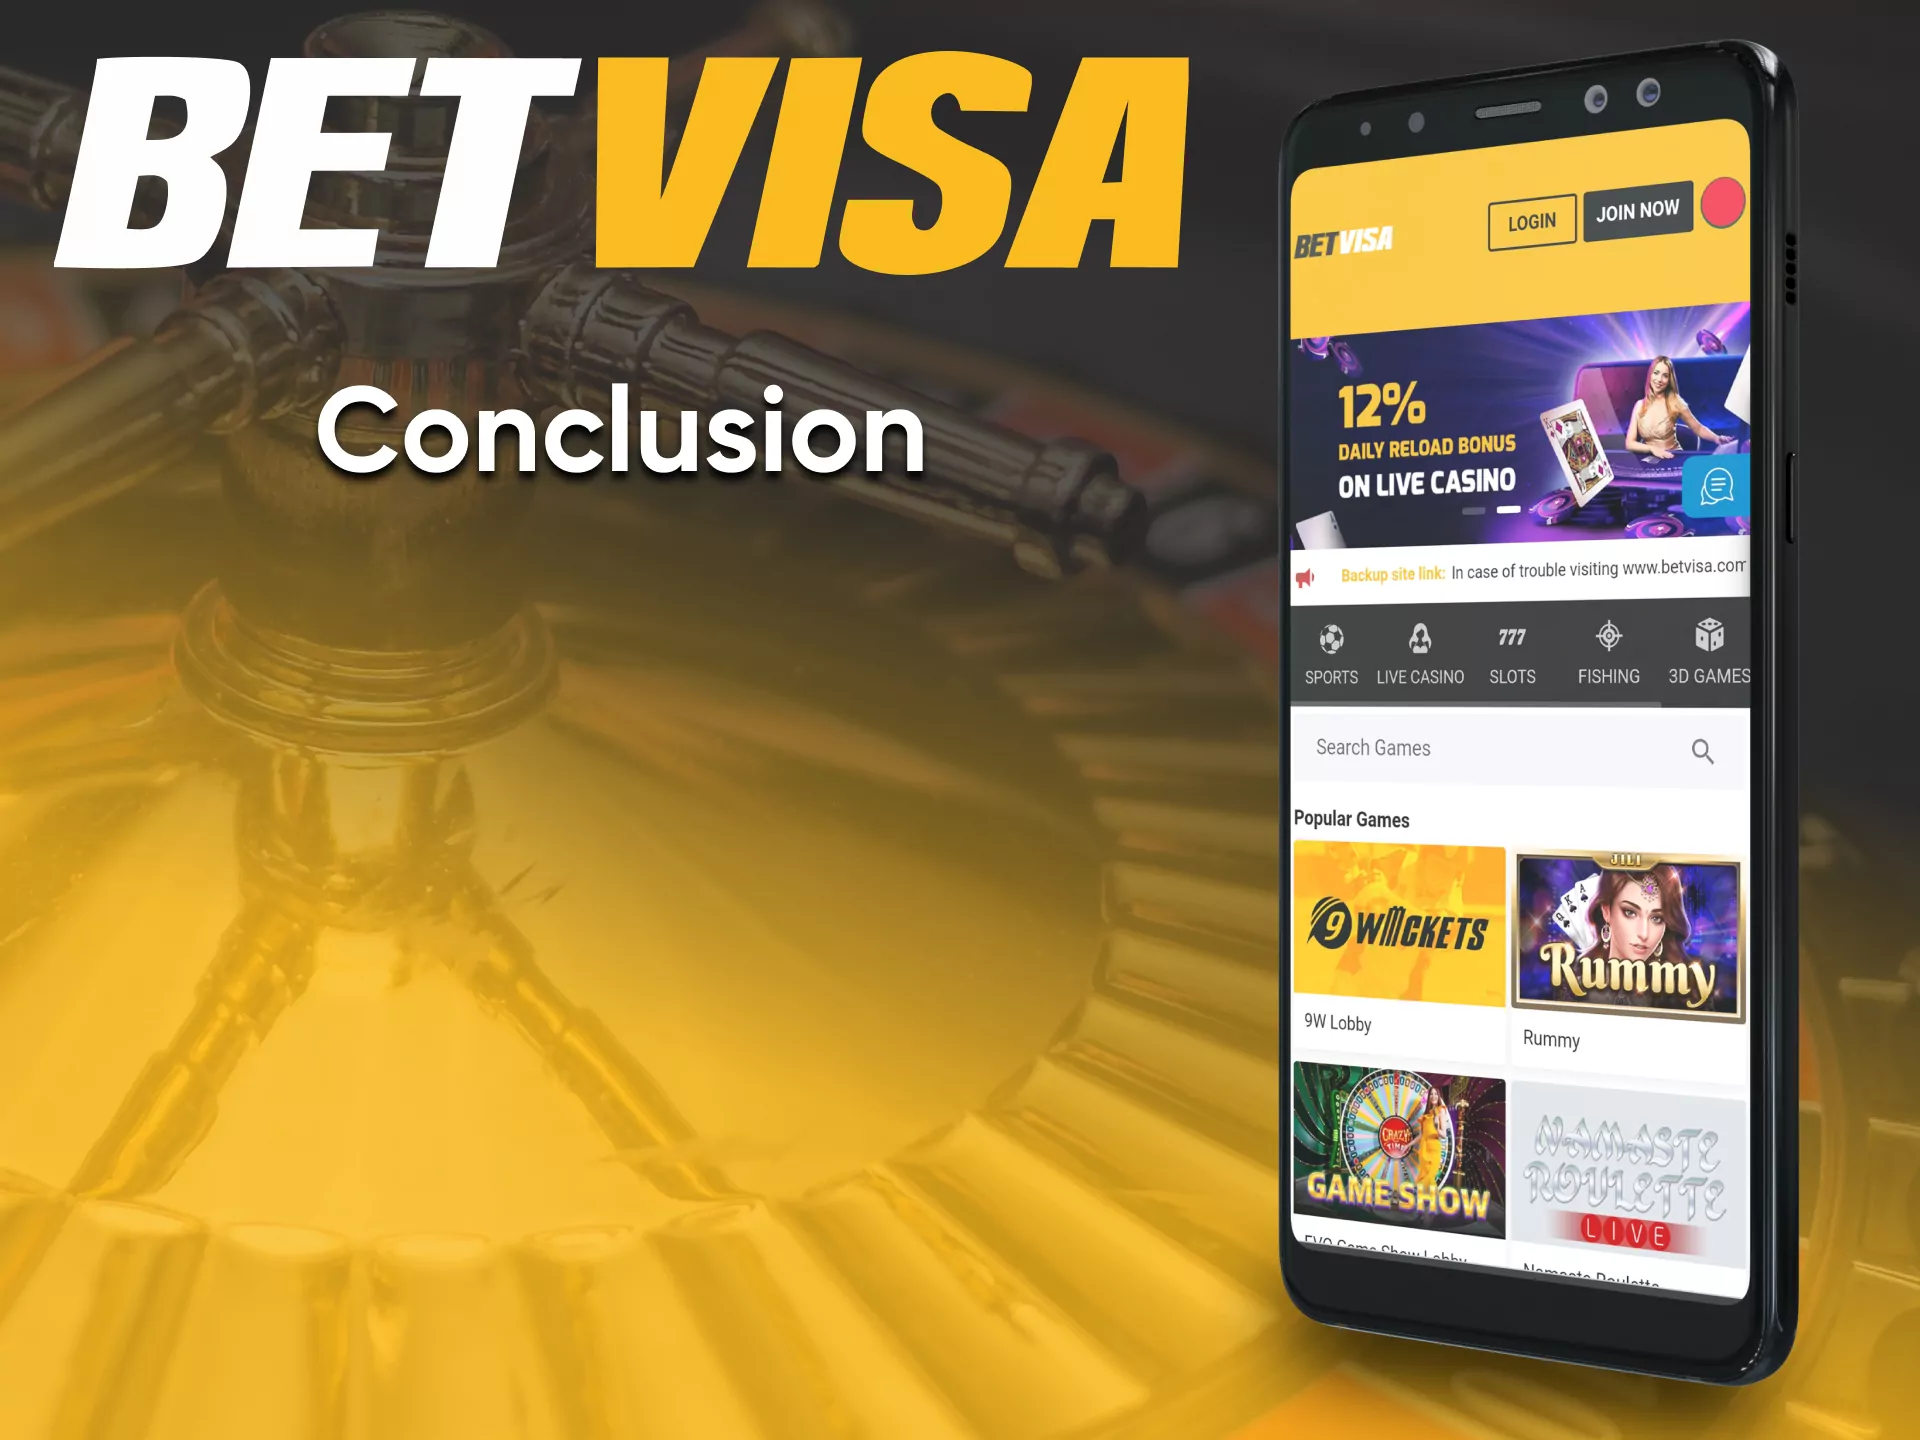 Choose the application from BetVisa for casino games.